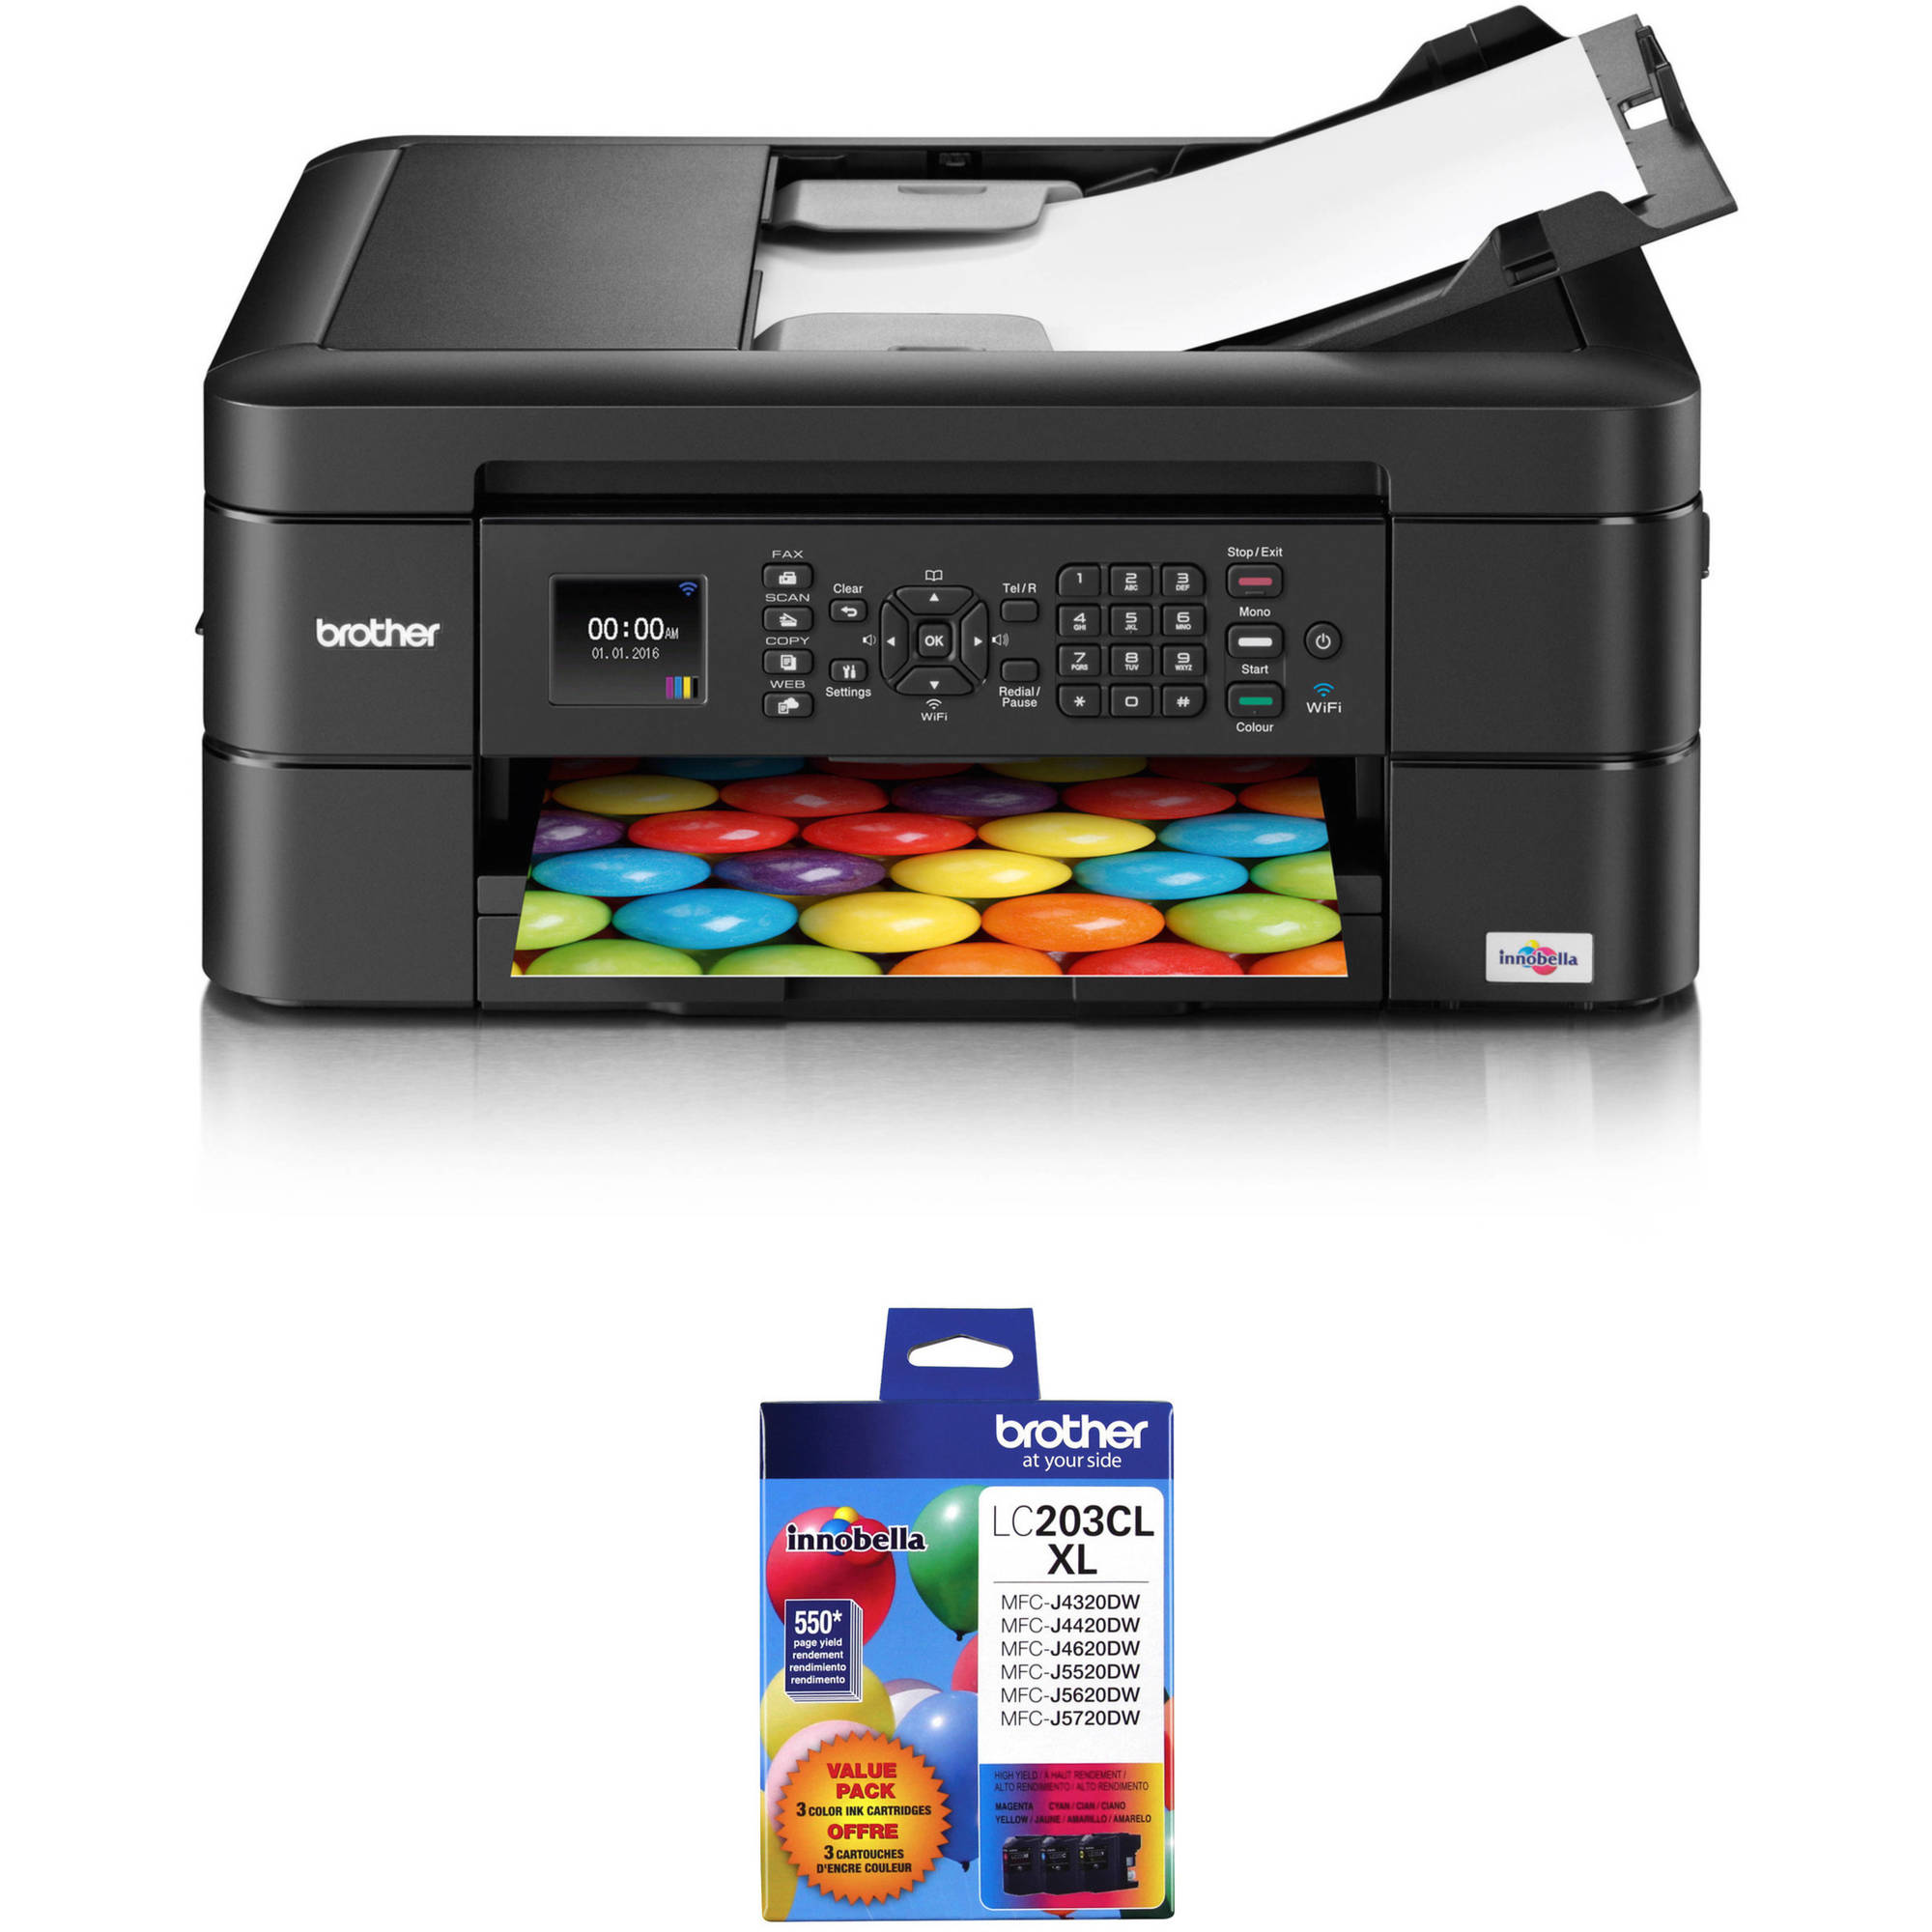 Brother Worksmart Series Mfc J460dw All In One Inkjet Printer